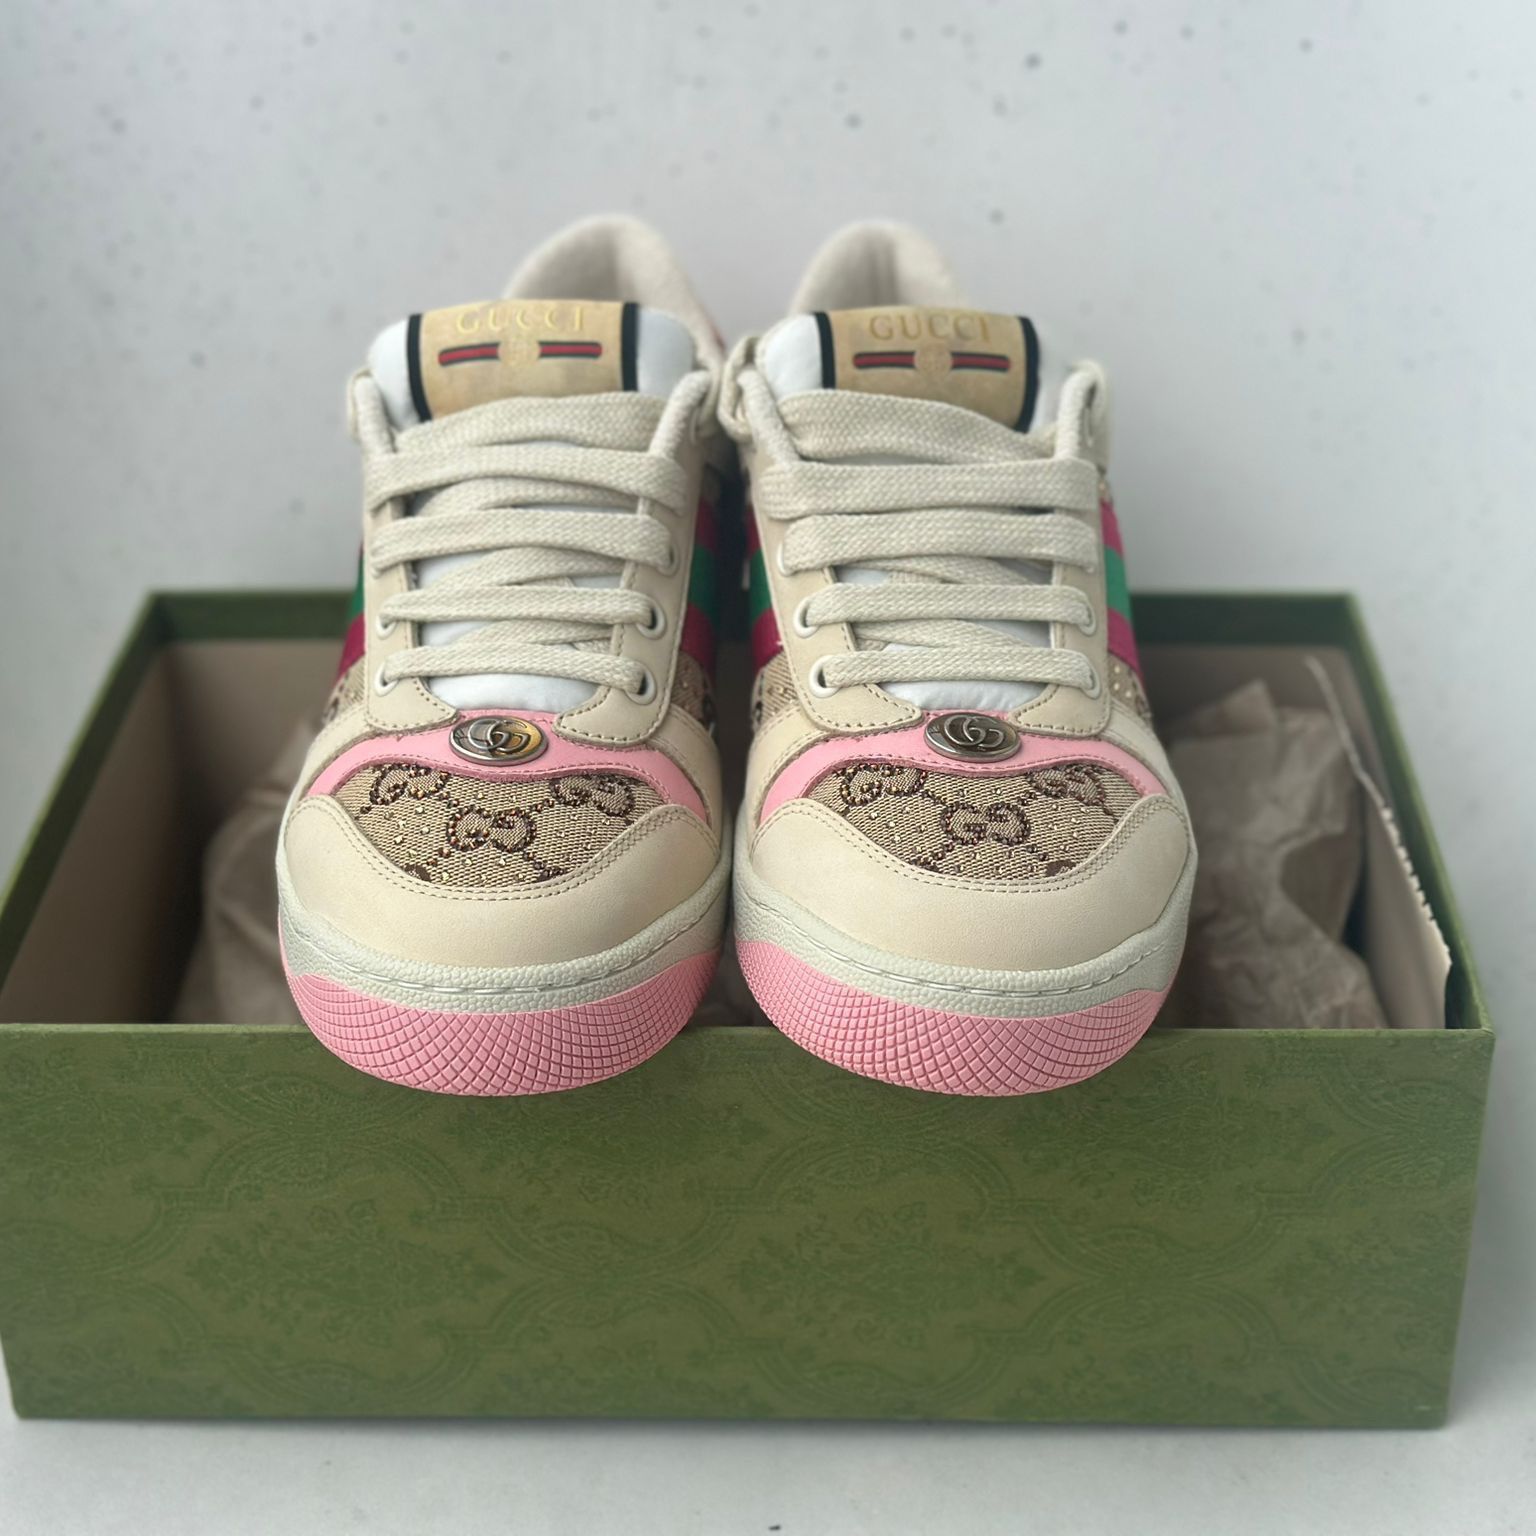 Gucci Sneakers Size 37